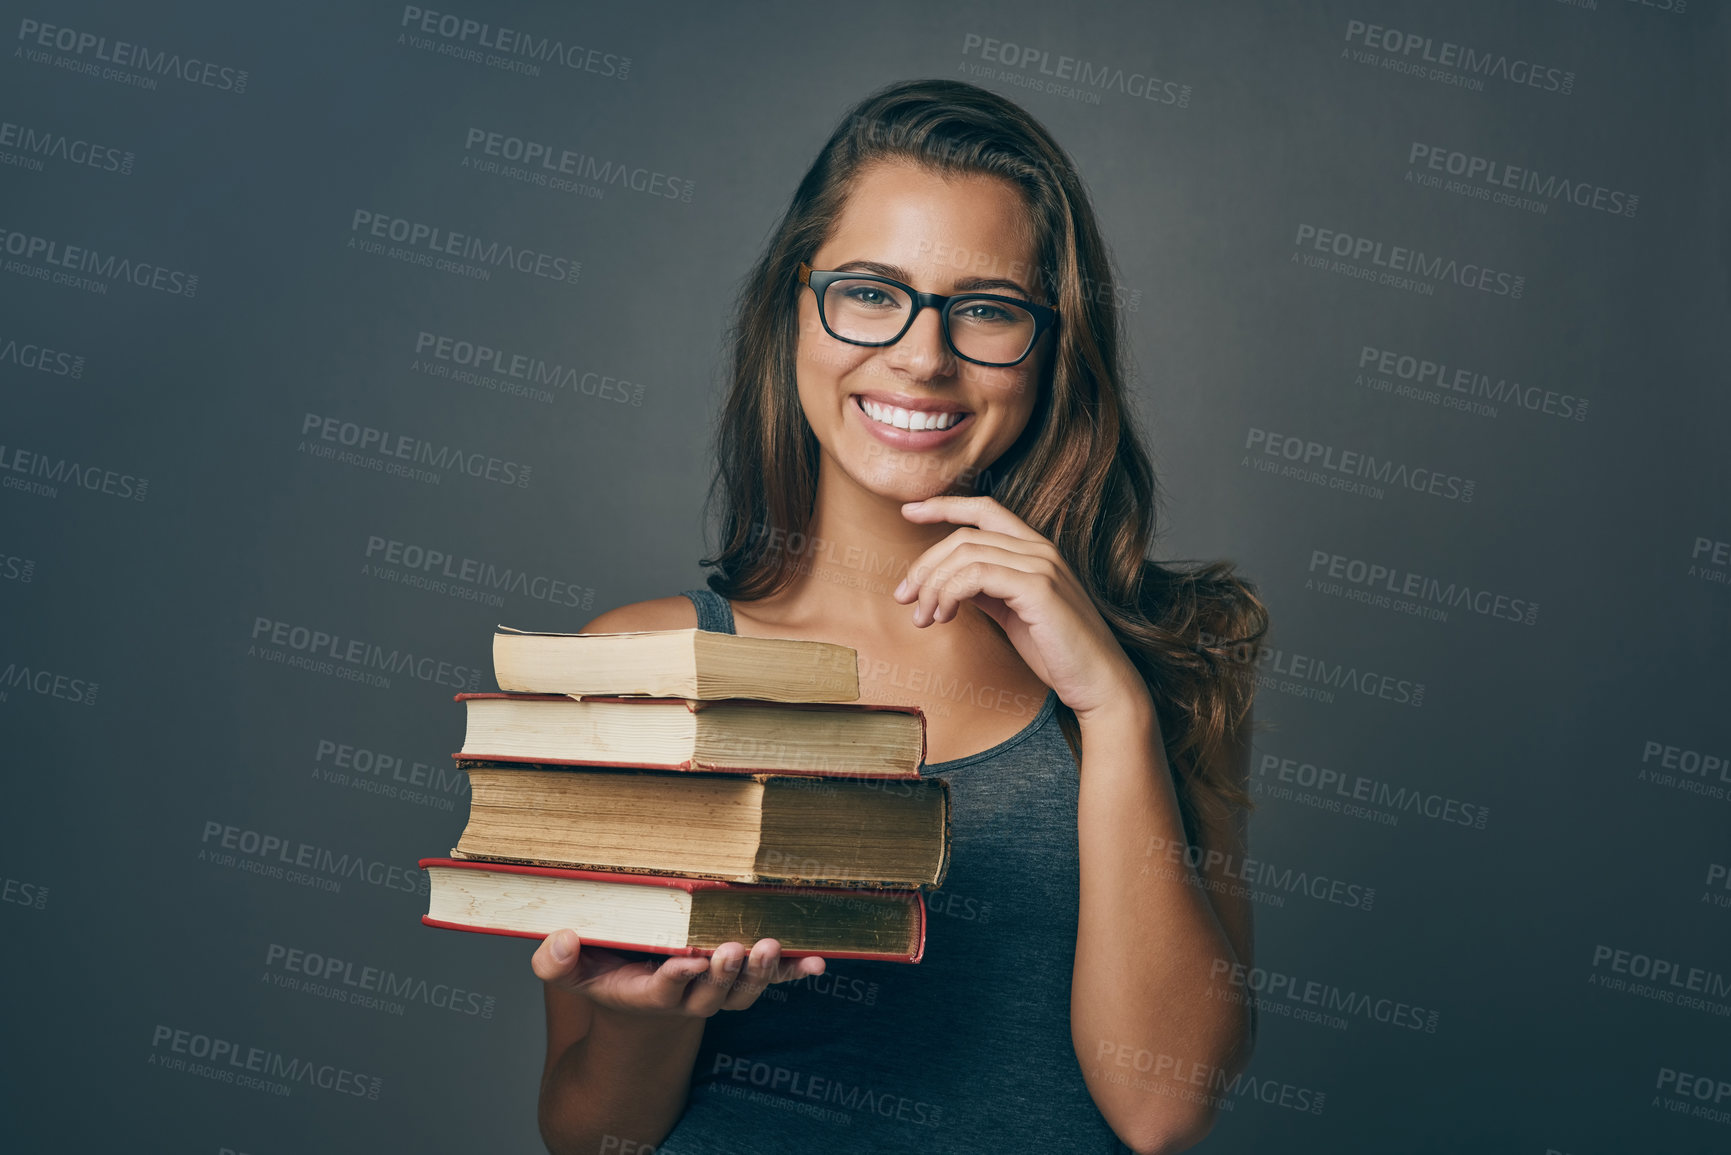 Buy stock photo Studio shot of a young woman holding a pile of books against a grey background